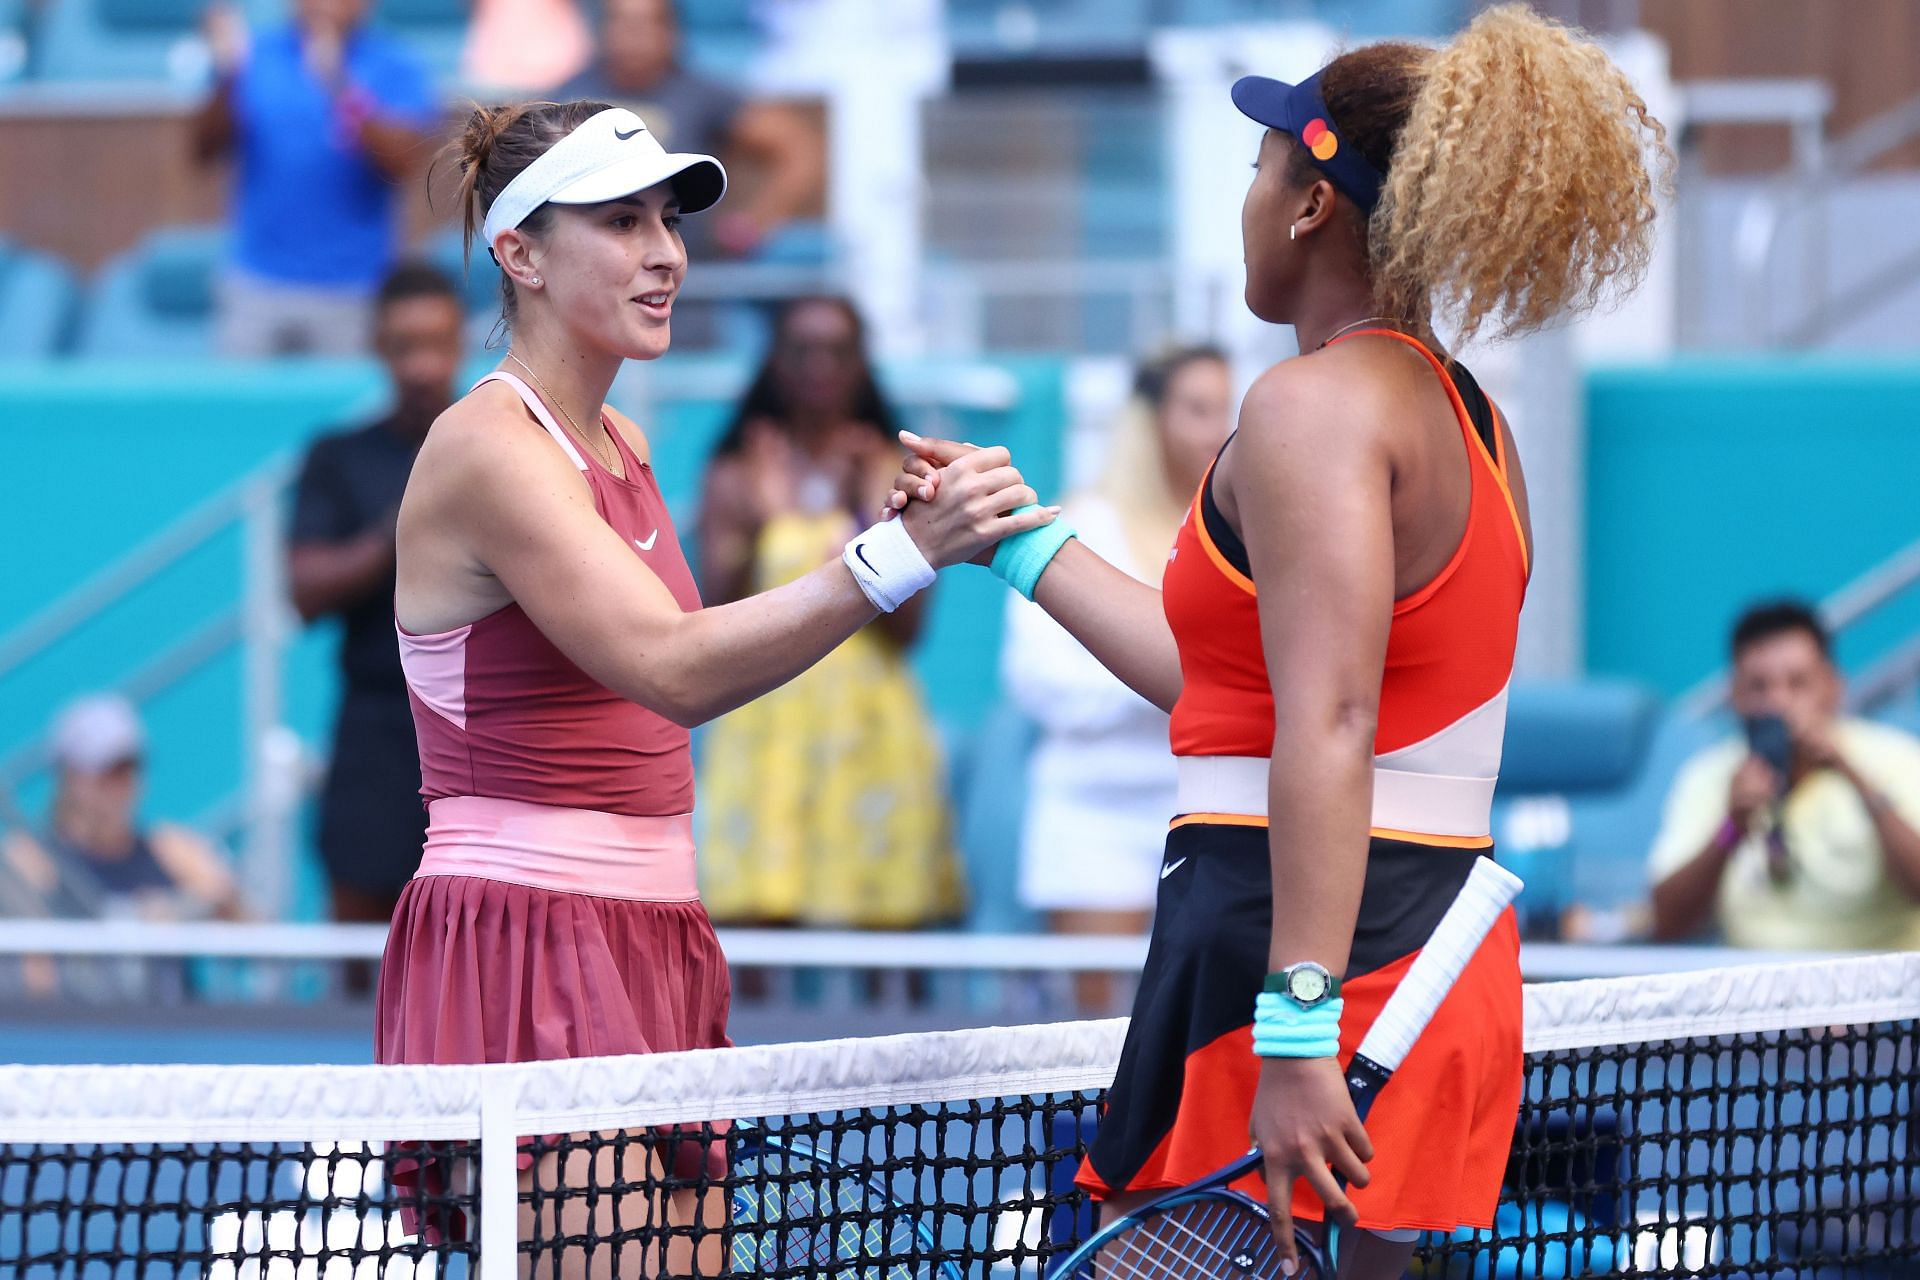 Naomi Osaka shares a handshake with Belinda Bencic at the net following her 4-6, 6-3, 6-4 victory over the Swiss.